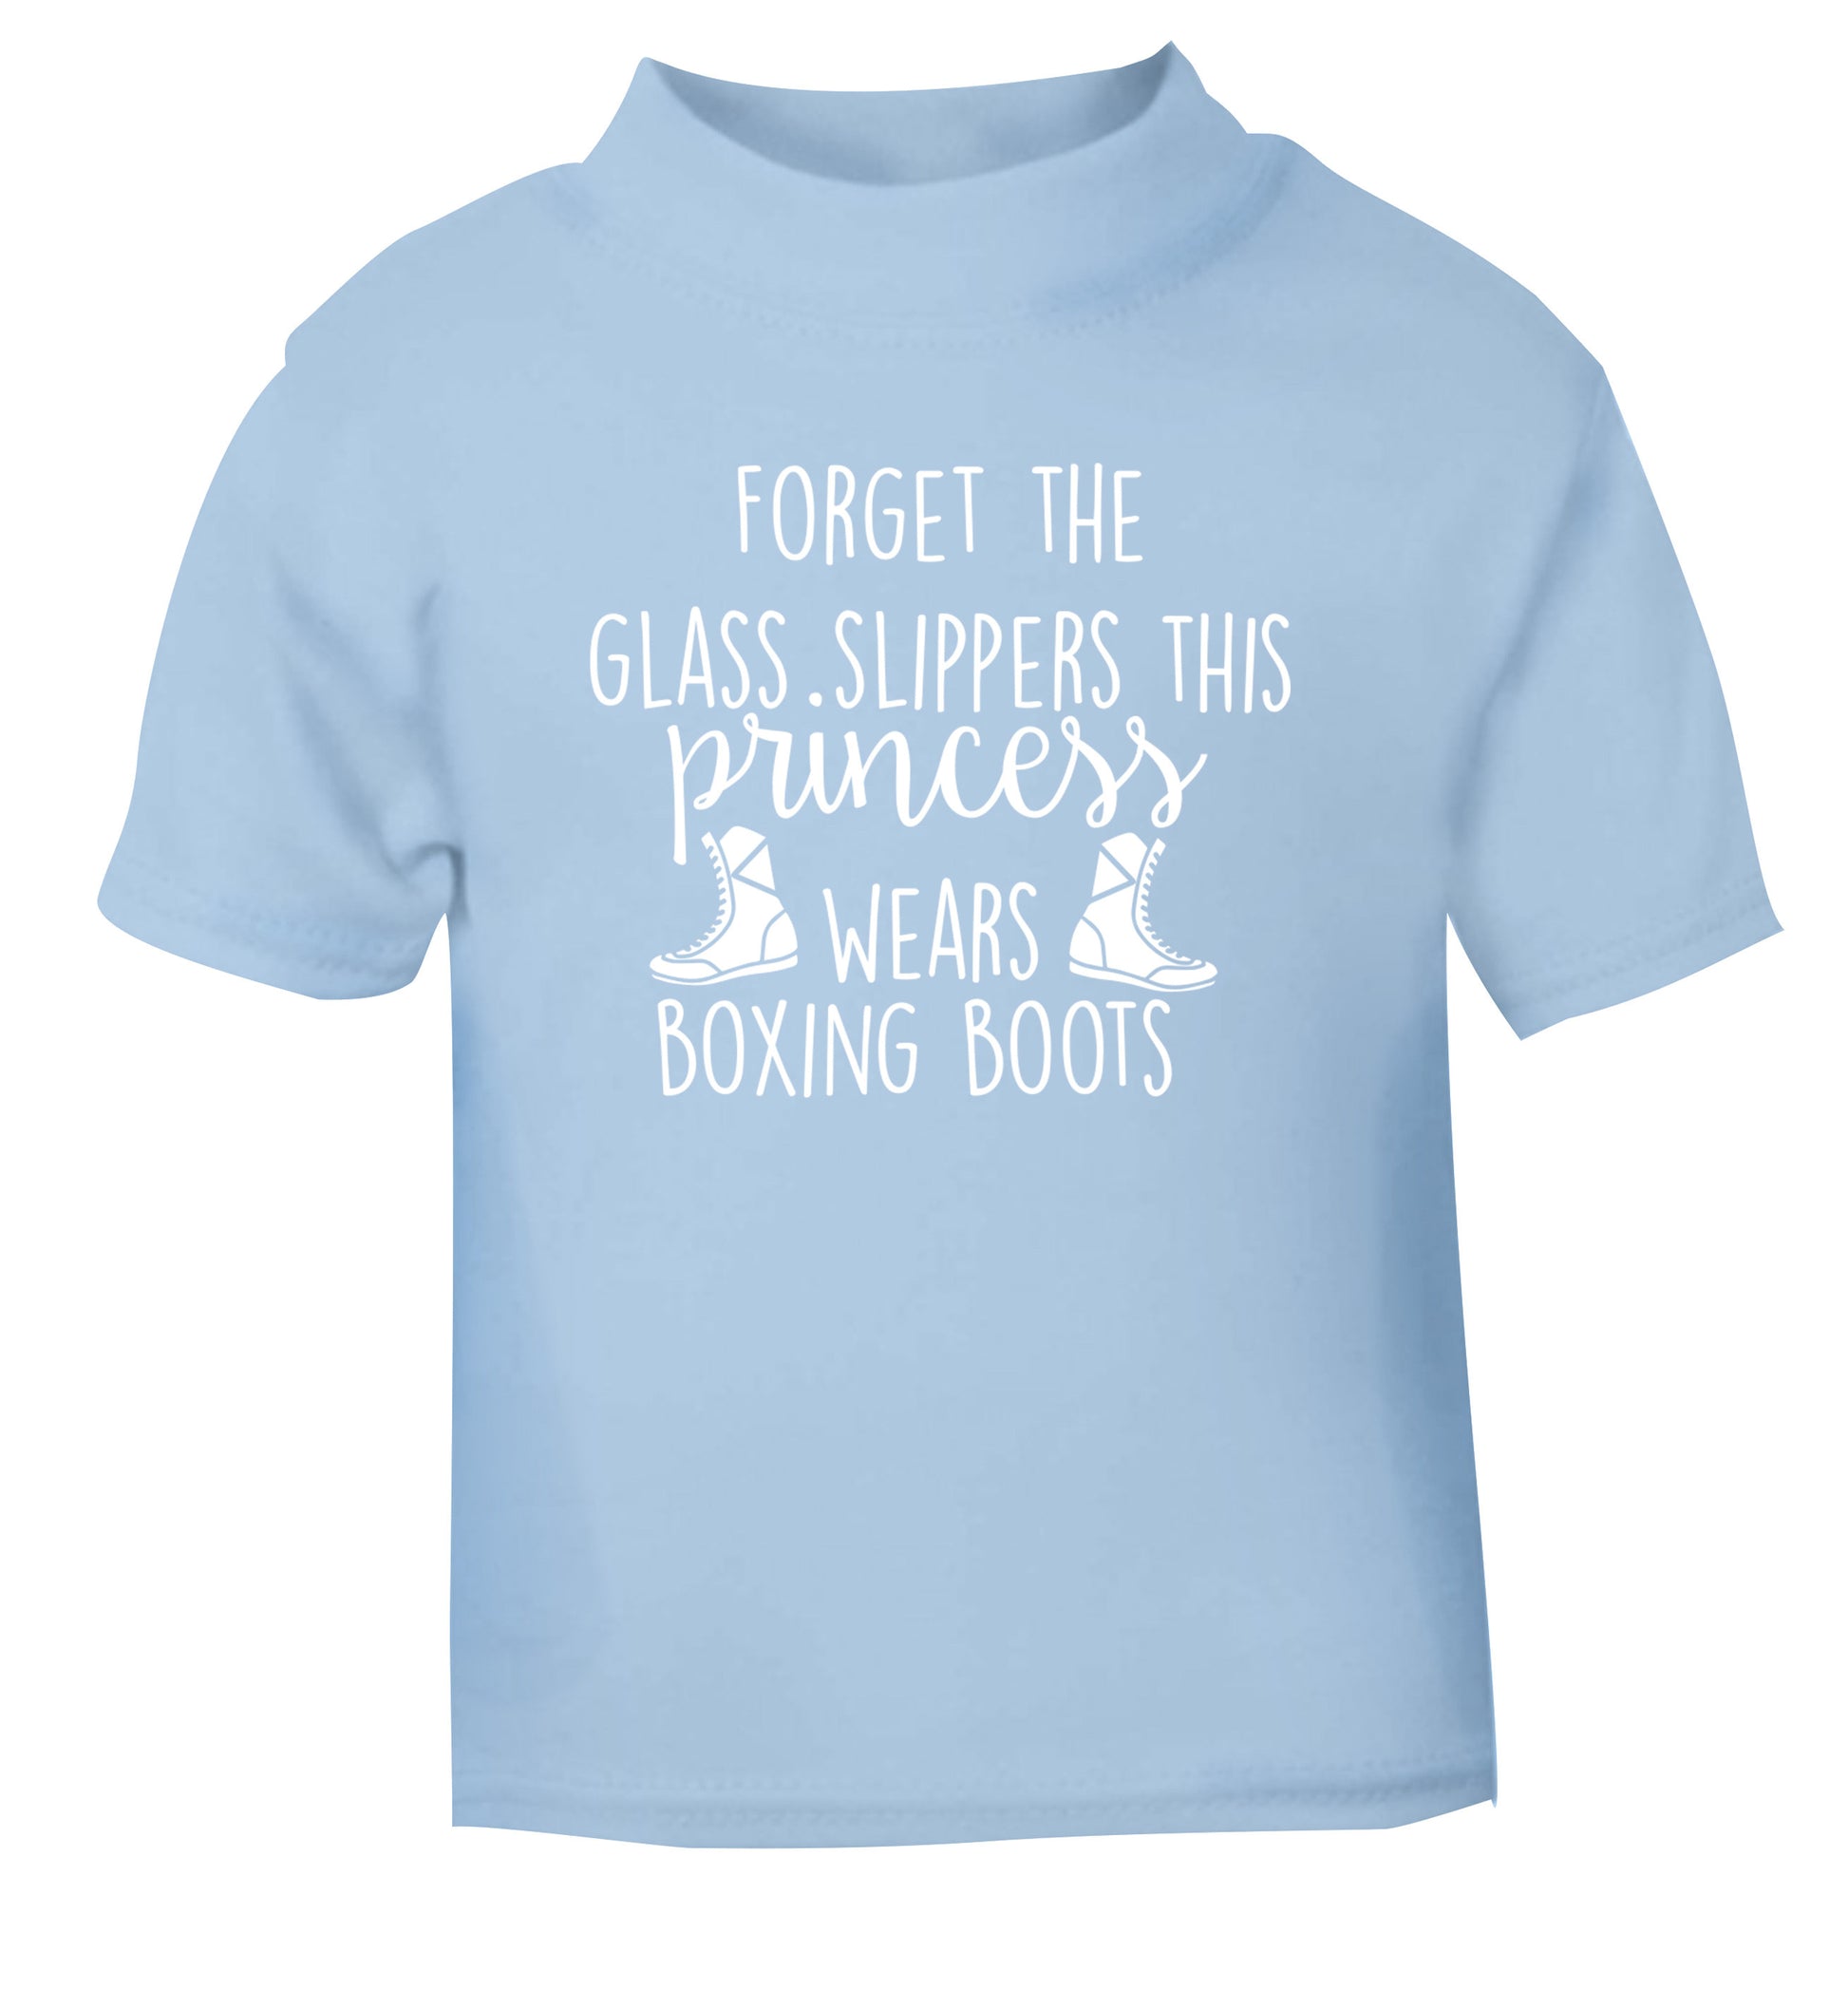 Forget the glass slippers this princess wears boxing boots light blue Baby Toddler Tshirt 2 Years